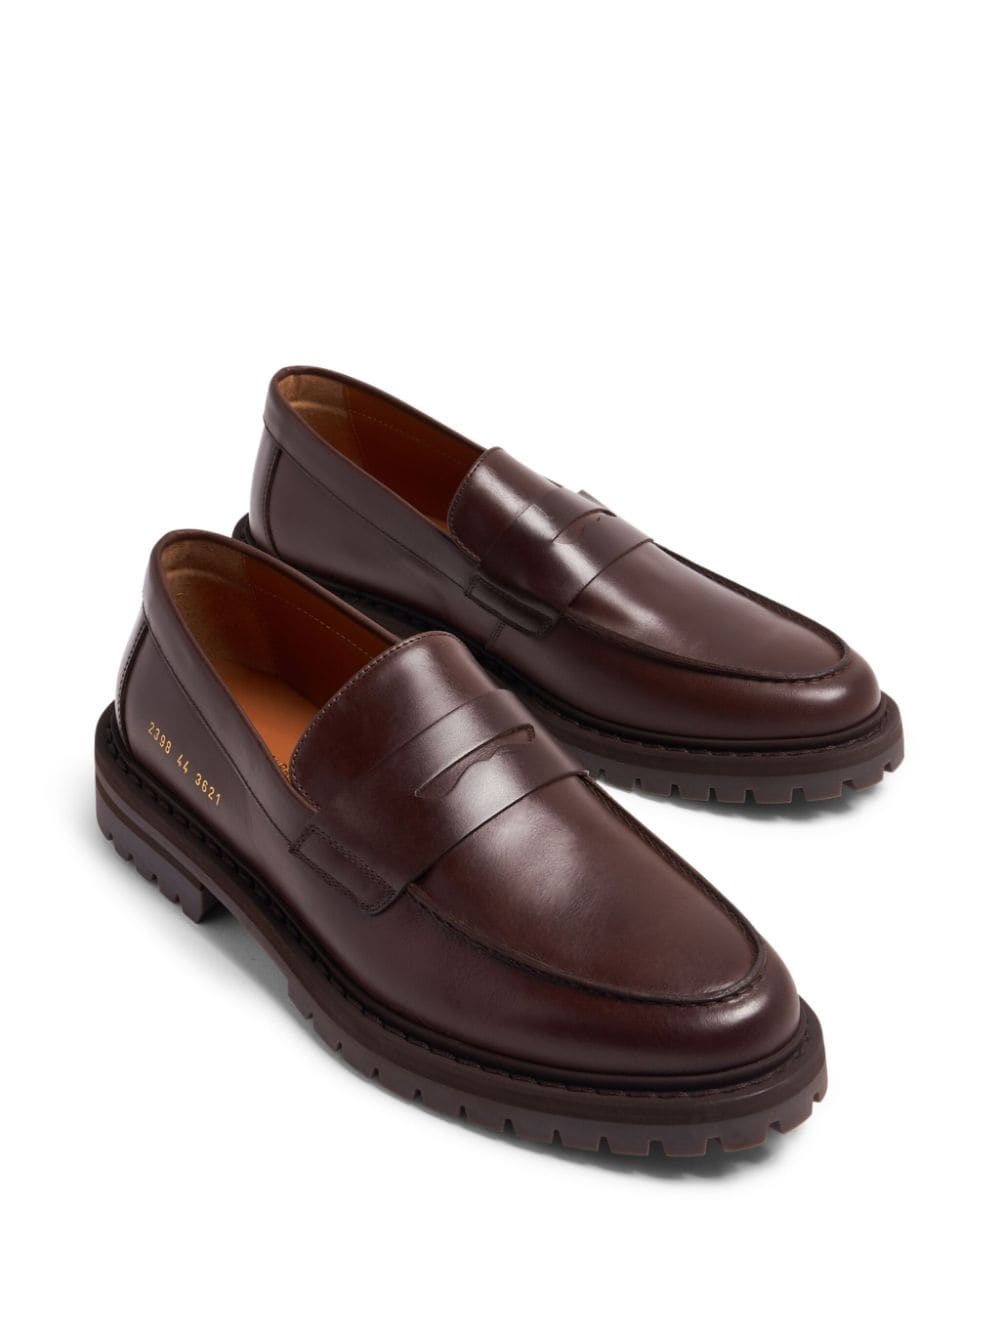 stamp-detail leather loafers - 5